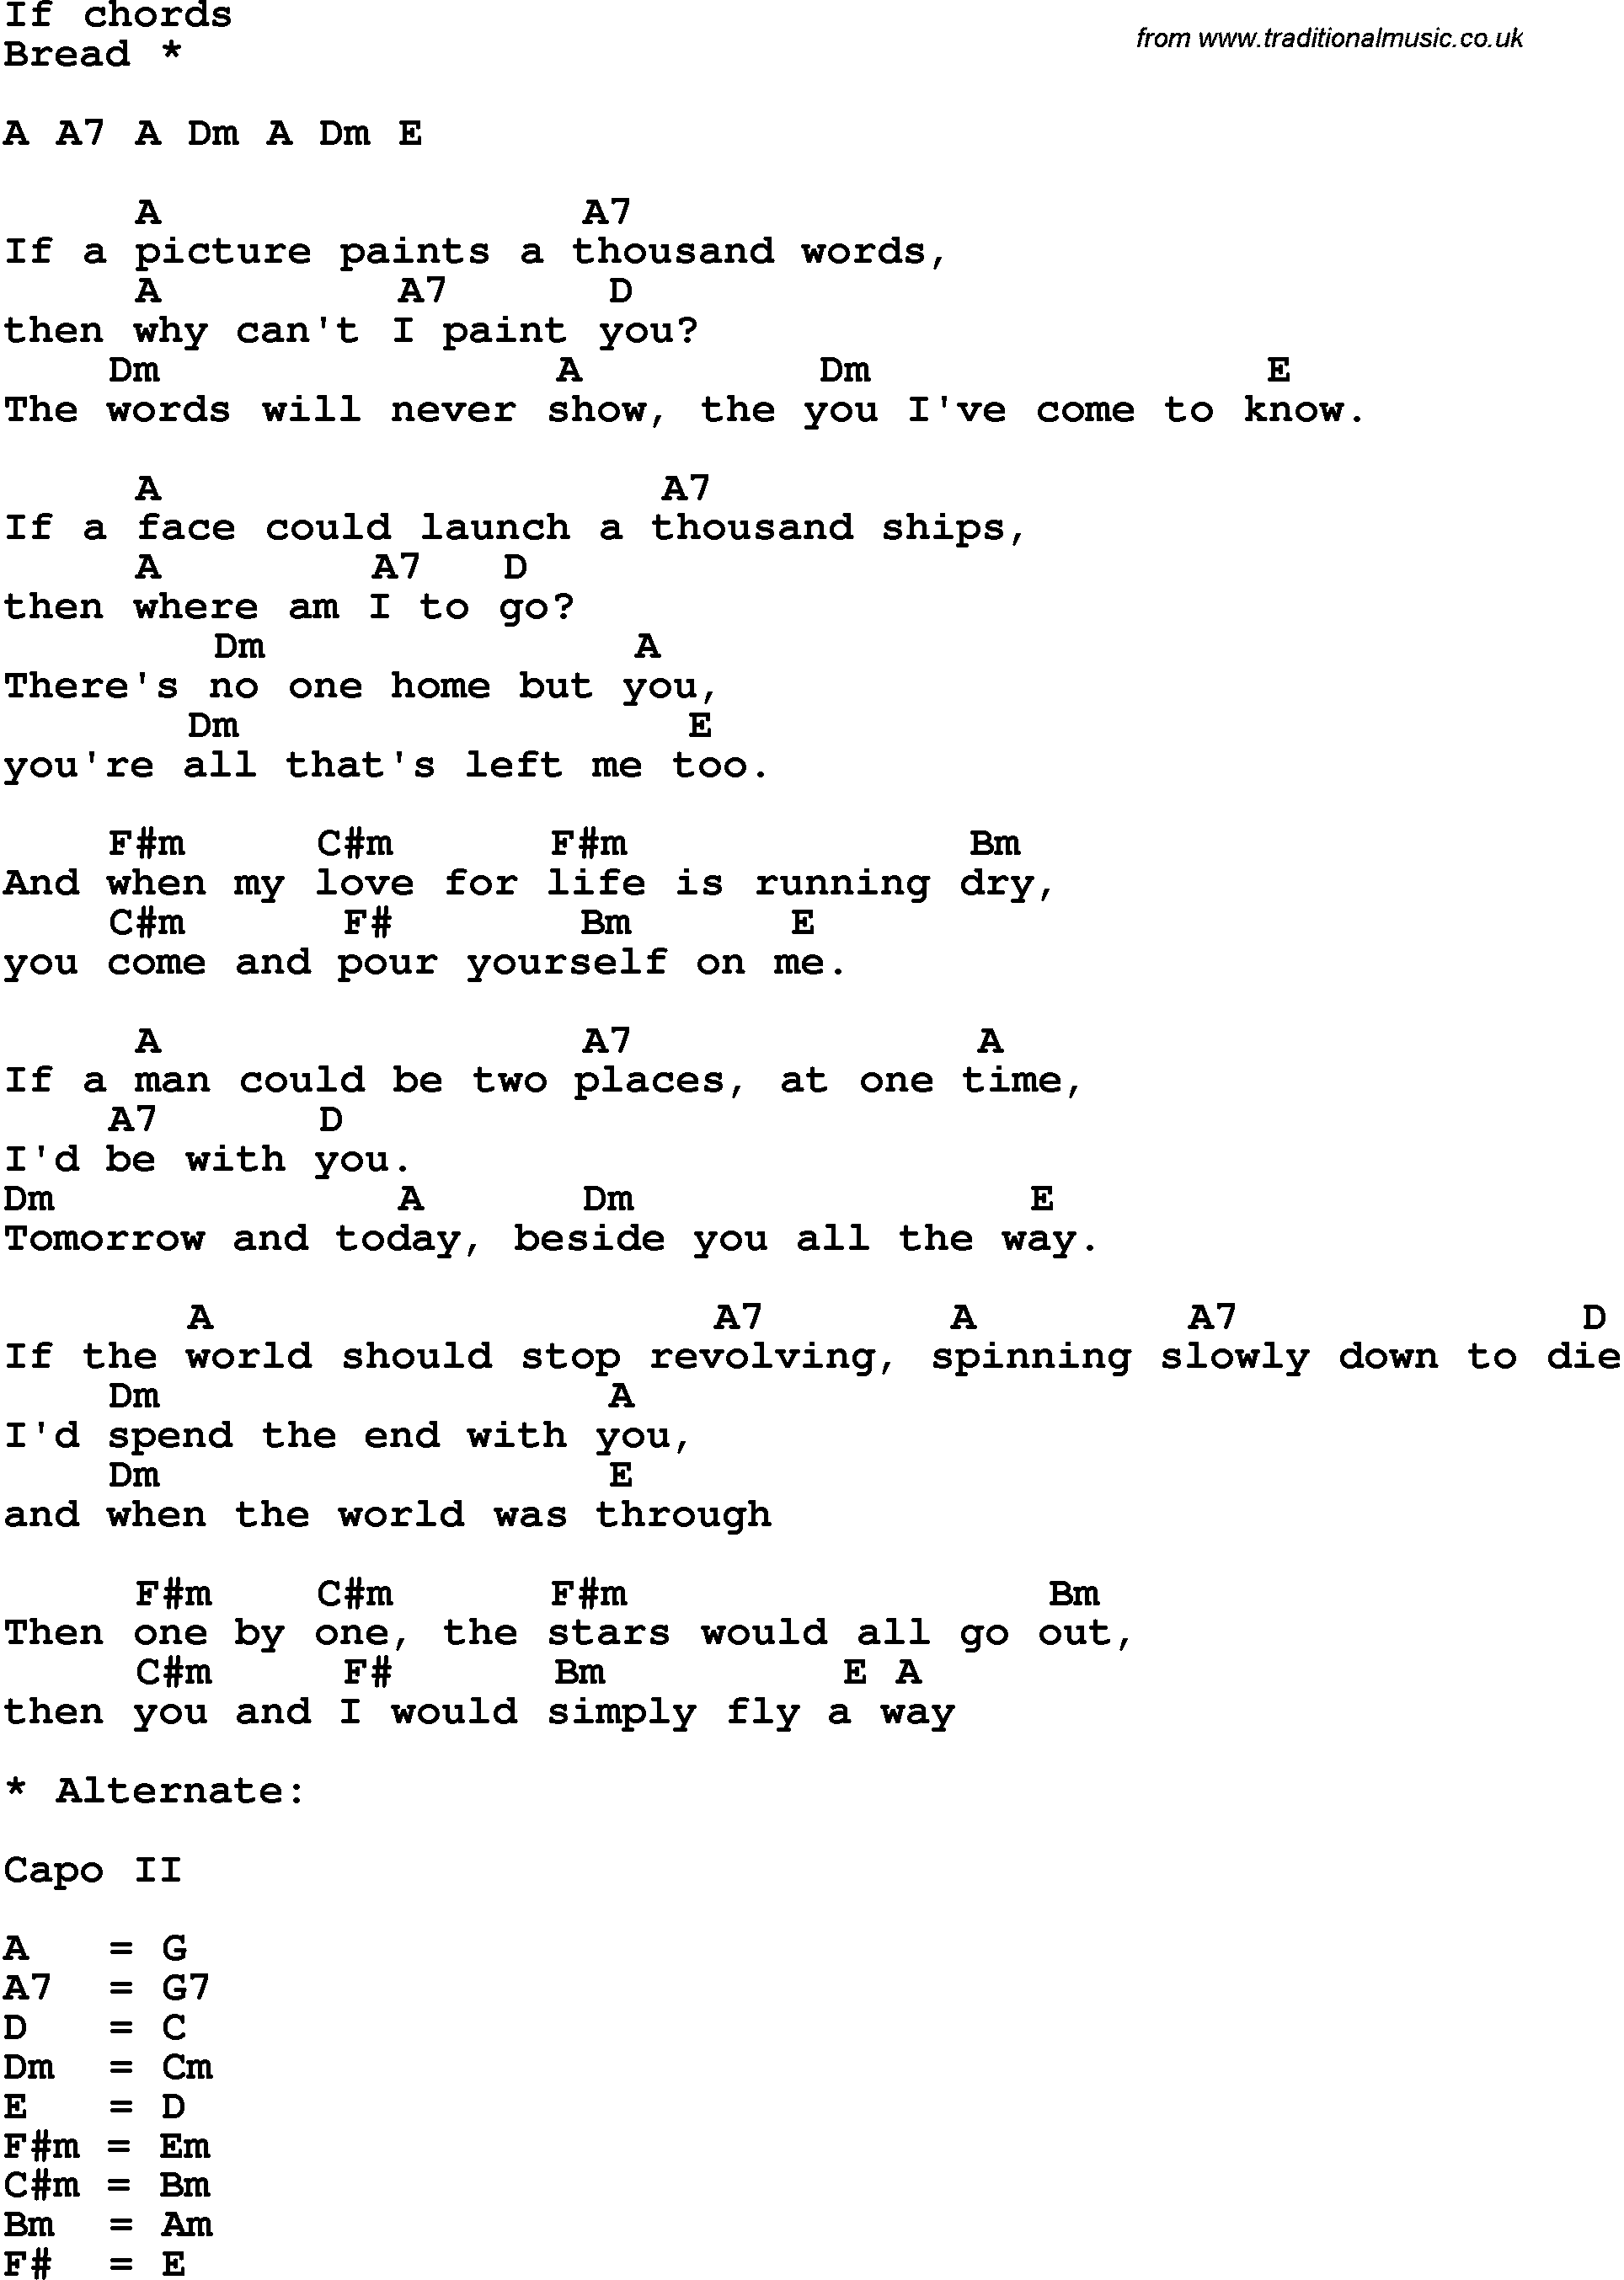 Song Lyrics with guitar chords for If